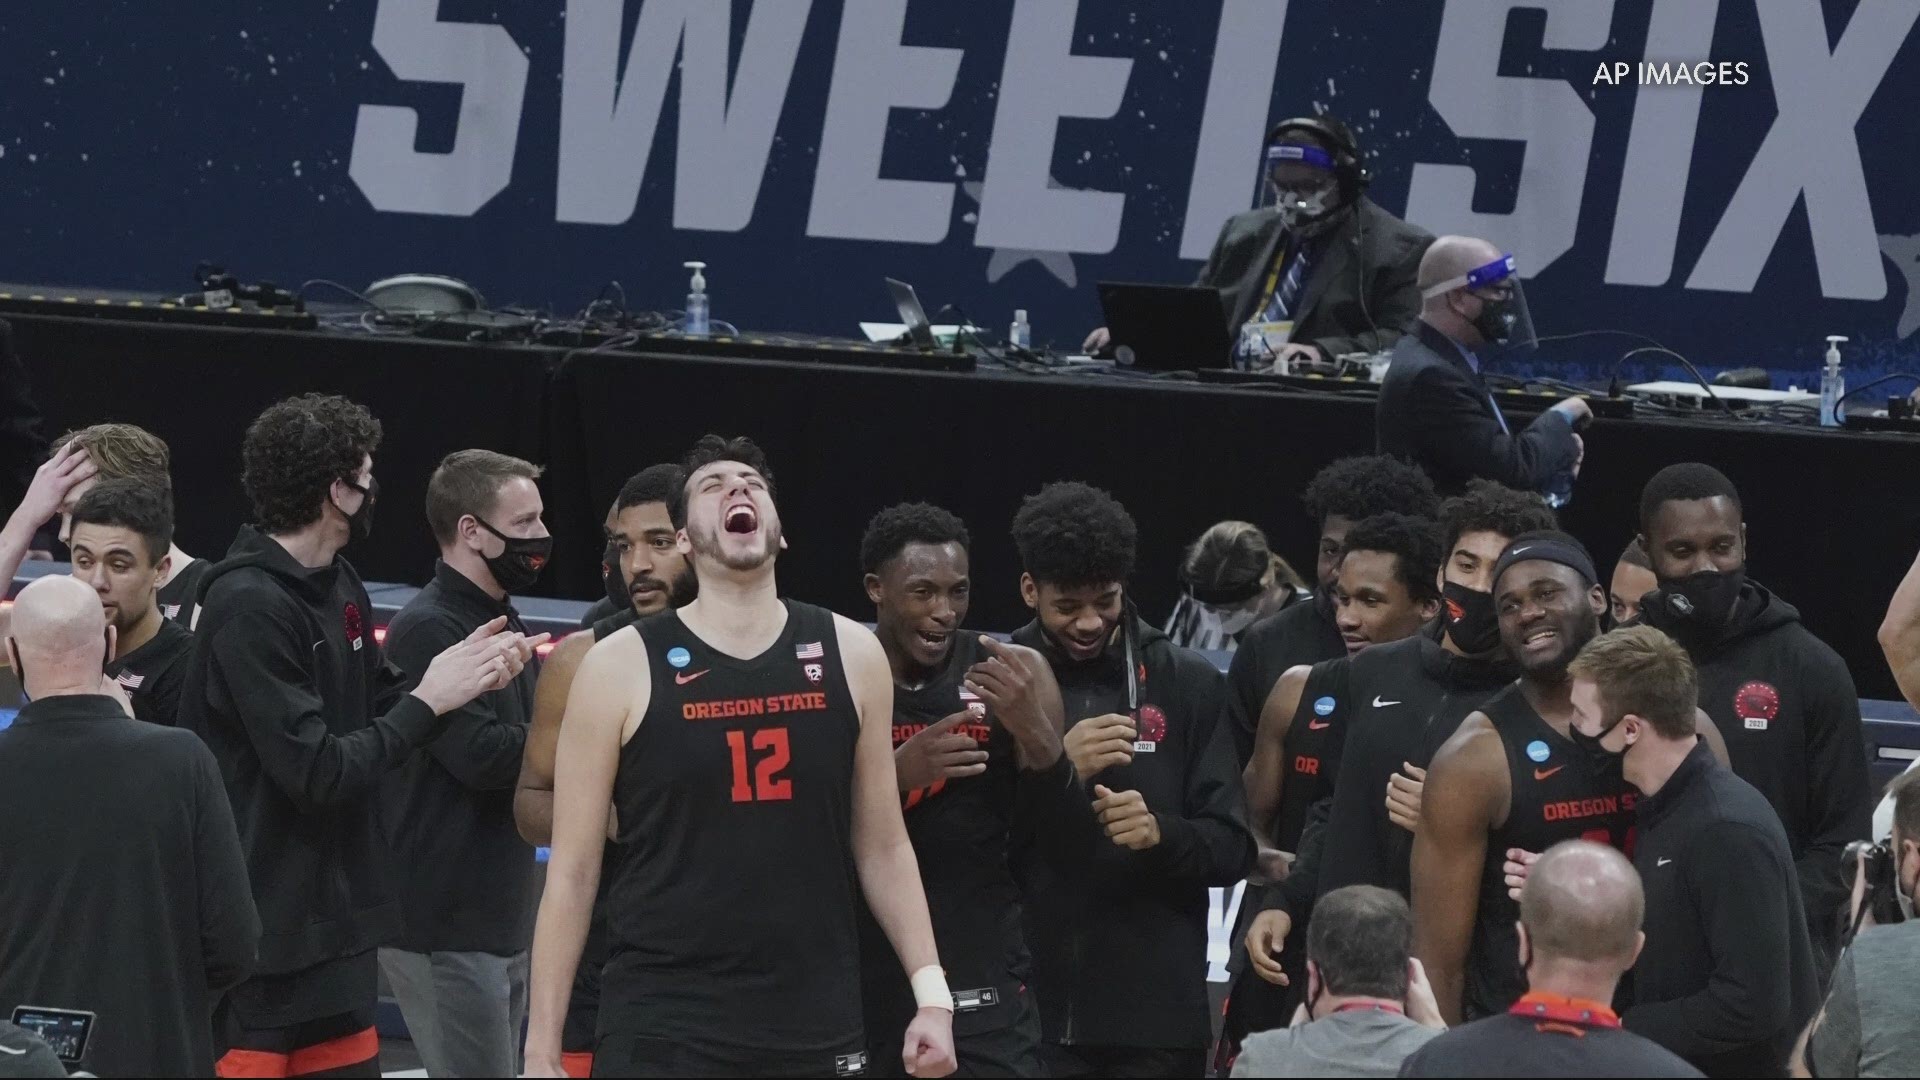 The Beavers are the lowest seeded team left in the March Madness tournament